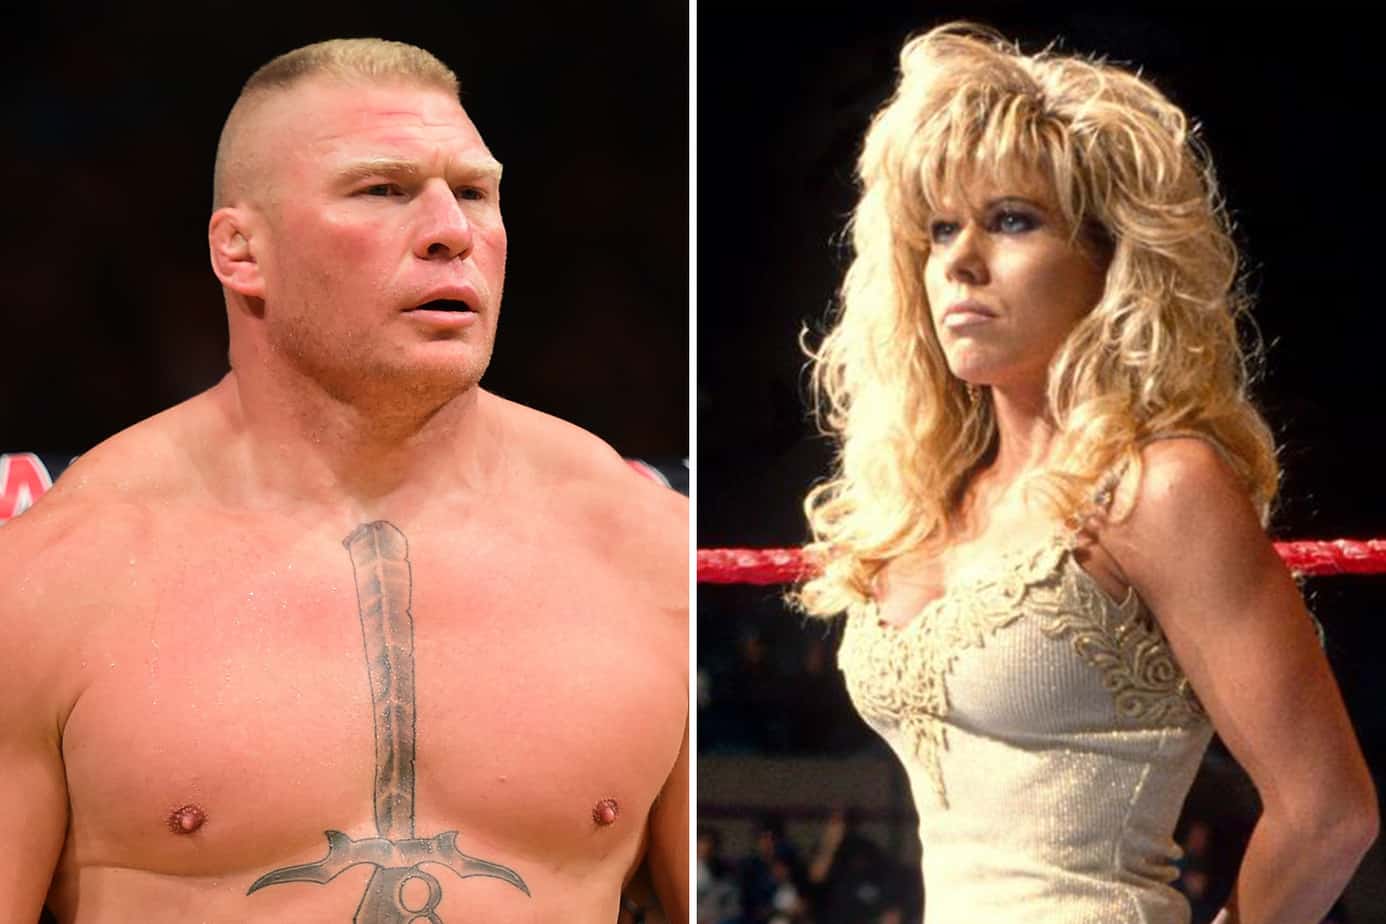 Brock Lesnar is in hot water after allegedly opening his towel and exposing his "manly bits" to former WWE Dive Terri Runnels.